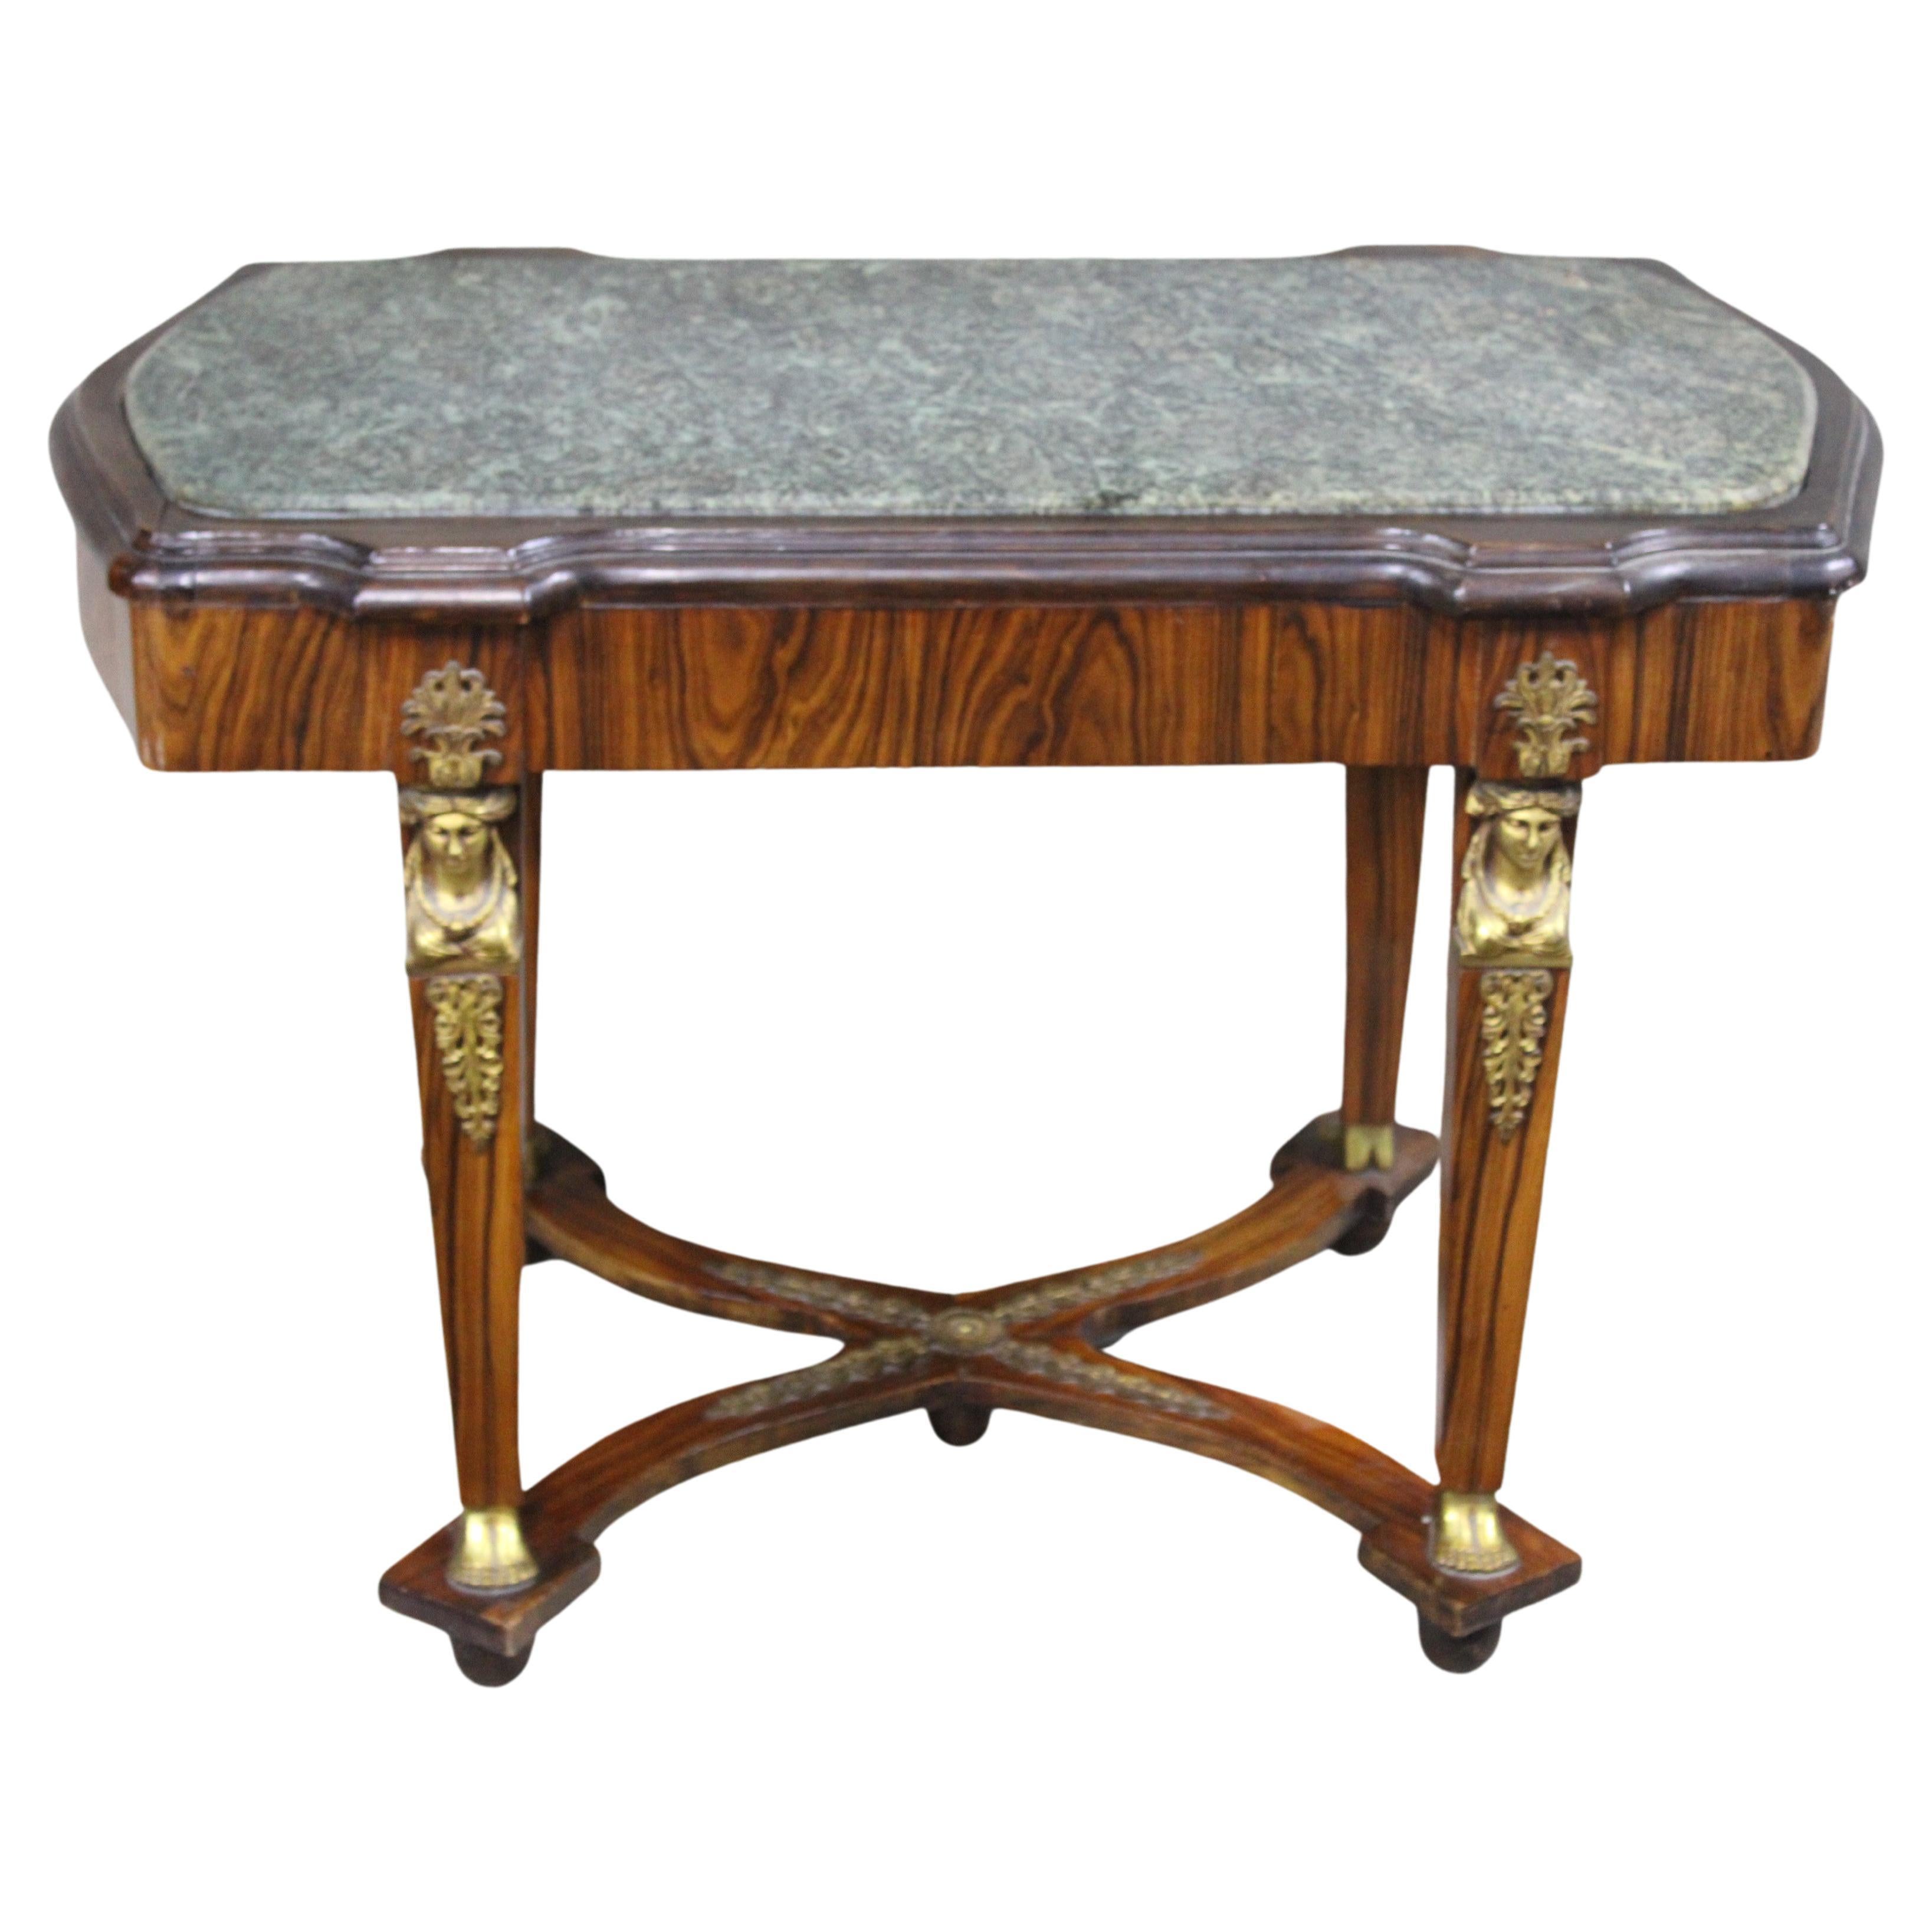 Empire Style Antique Center Table with a Green Marble Top